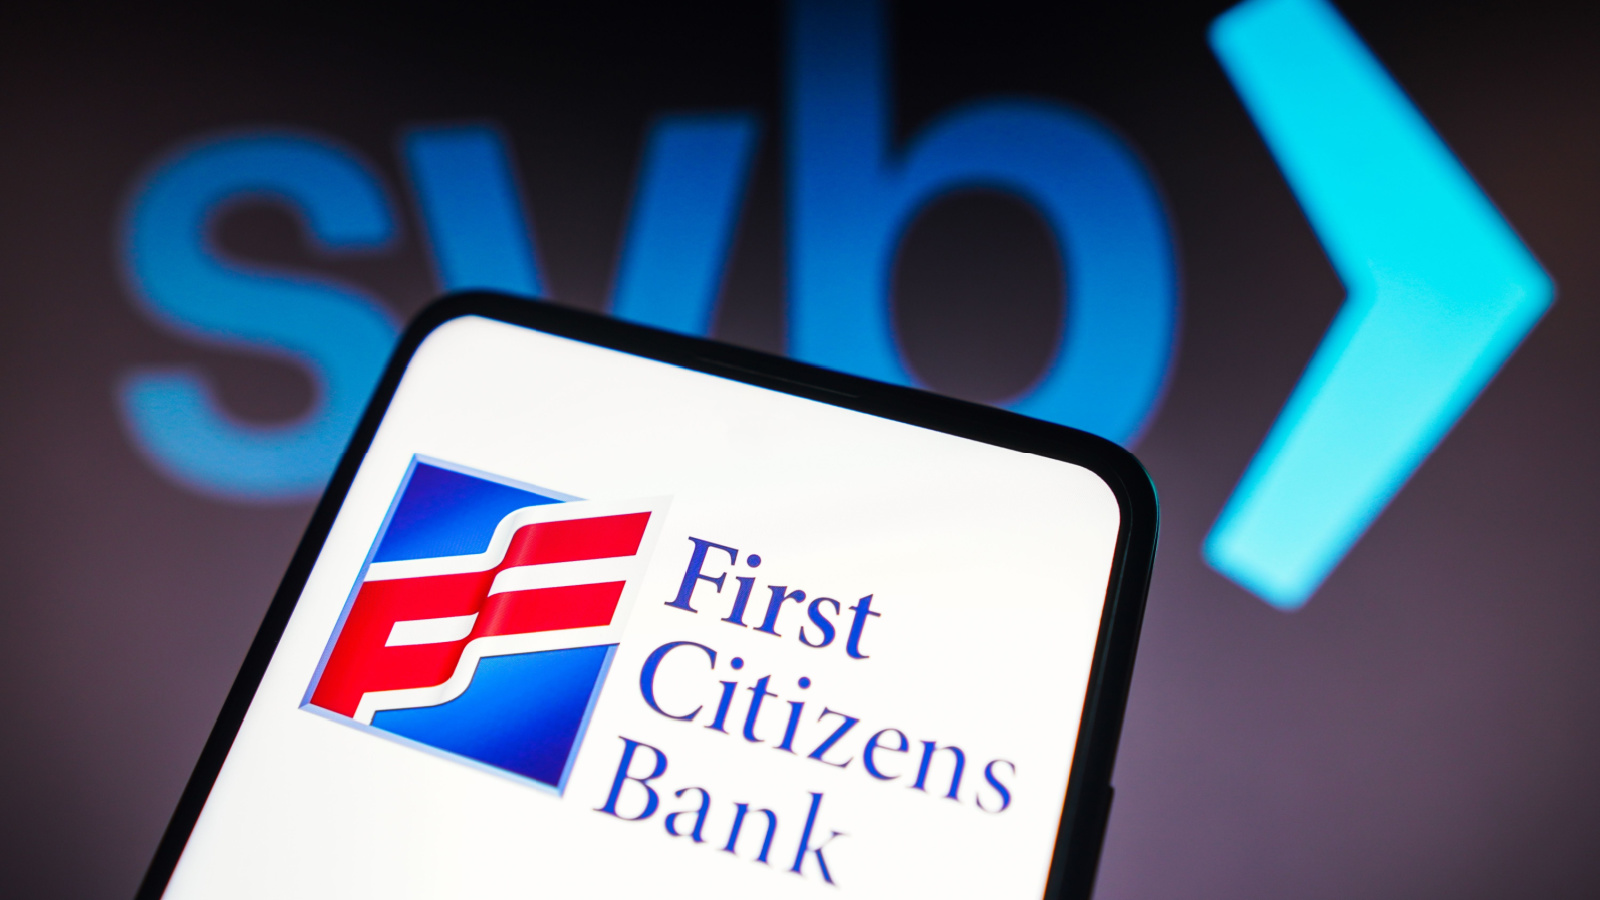 First Citizens Bank (FCNCA) logo displayed on smartphone in front of SVB logo in dark background behind phone